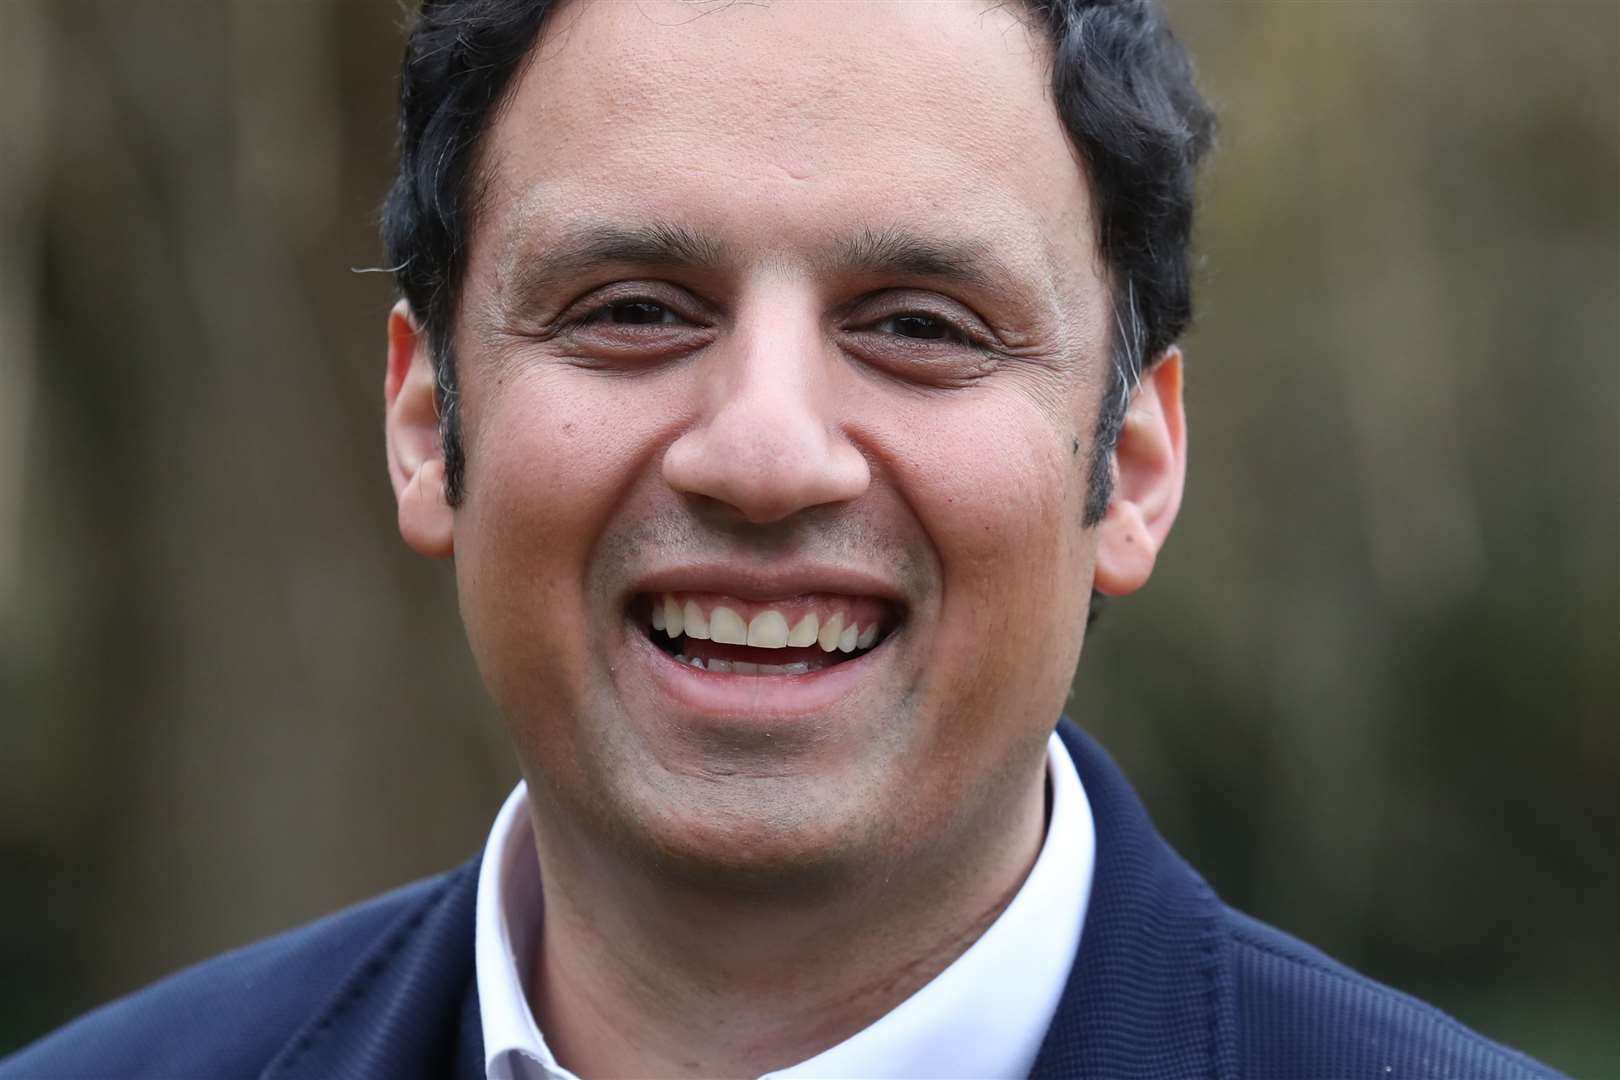 Anas Sarwar said Parliament is bigger than any party (Andrew Milligan/PA)